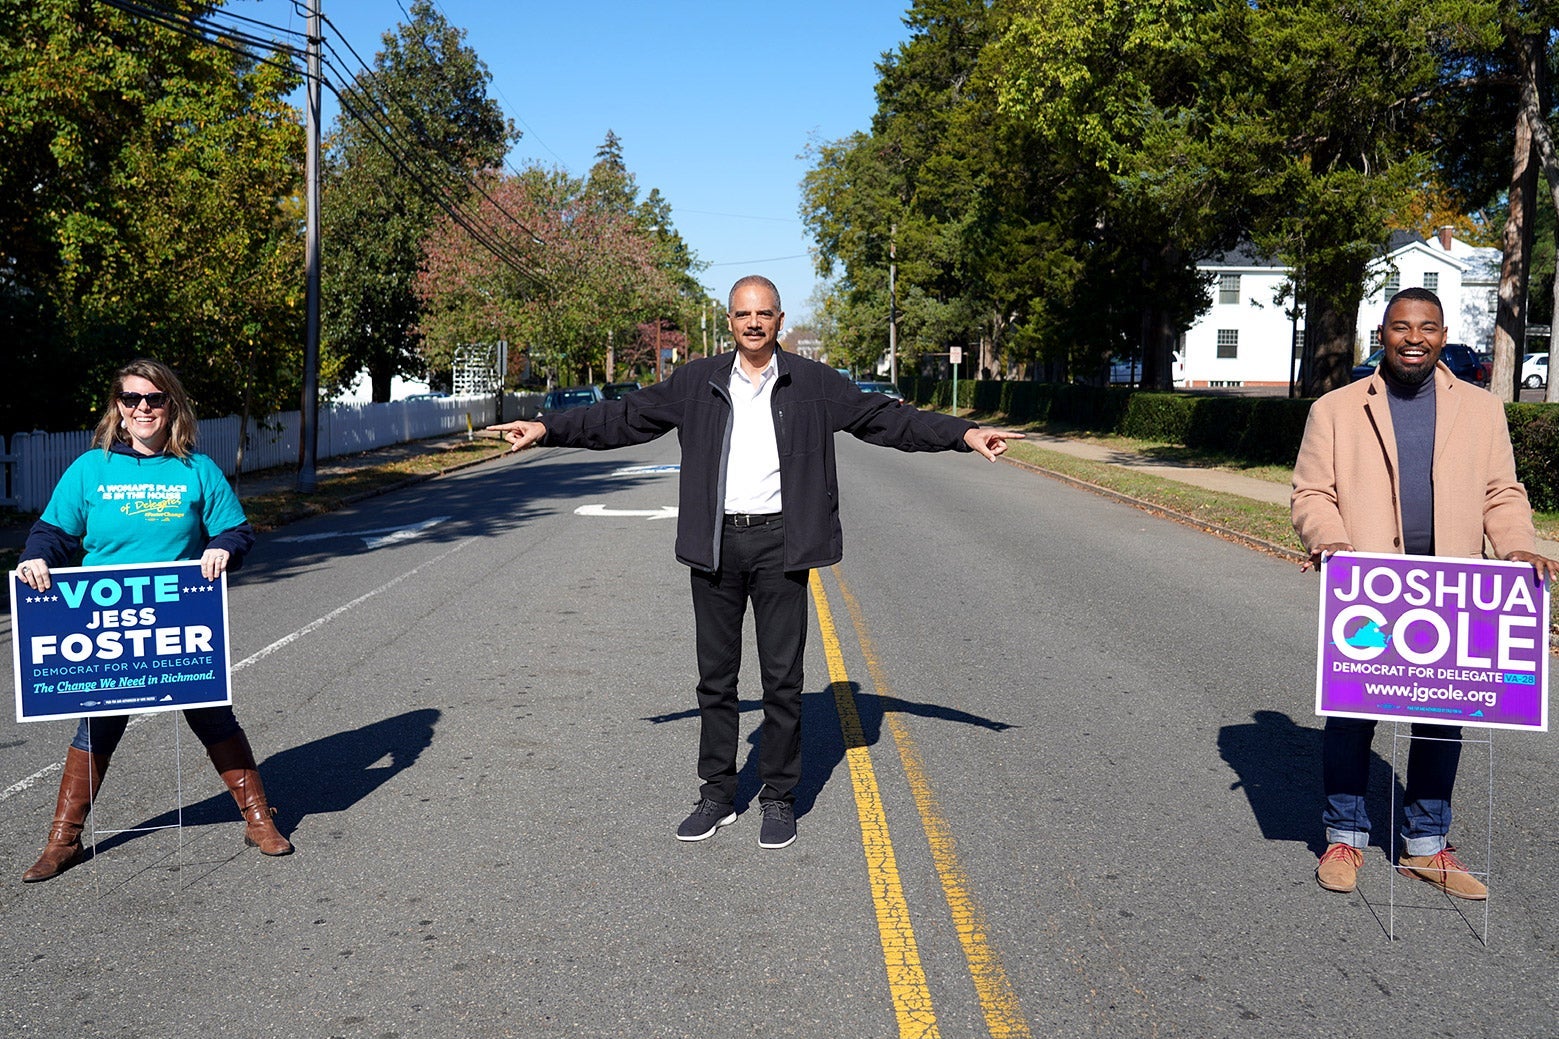 Eric Holder stands in the middle of the road and points at Jess Foster and Joshua Cole, who hold campaign yard signs.